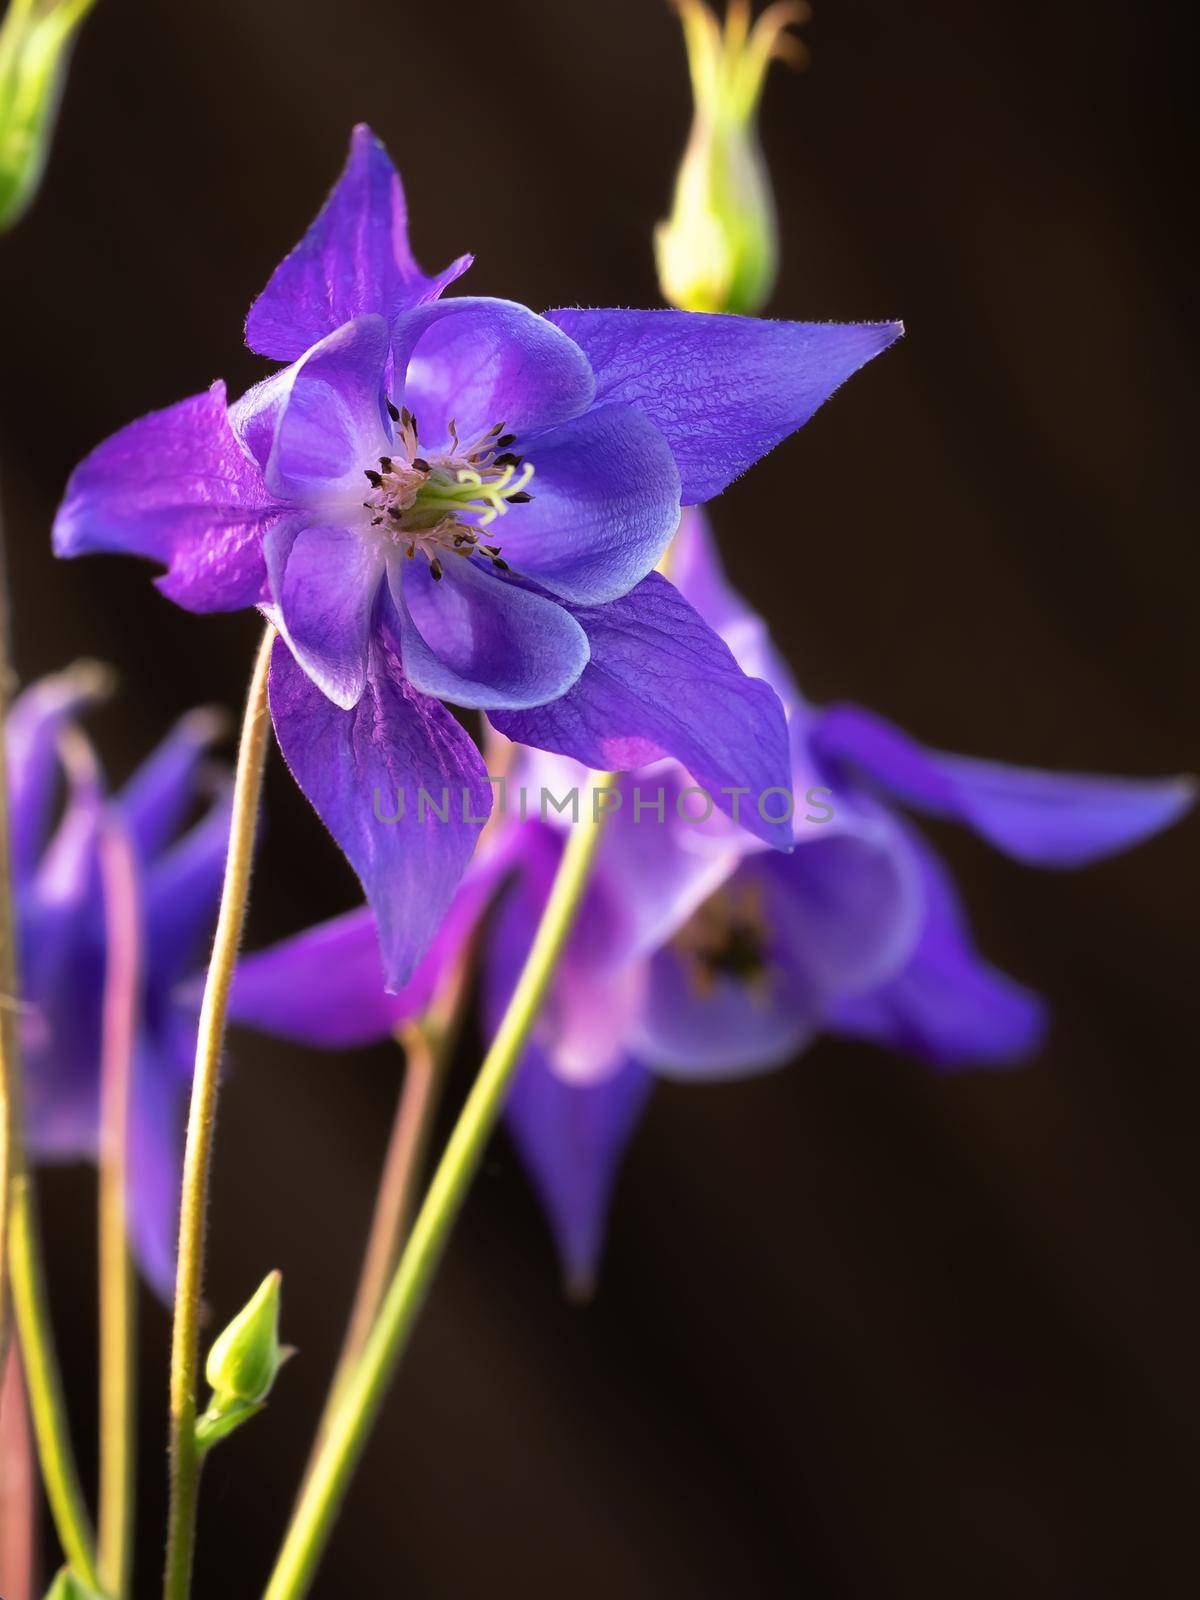 Perennial herb Aquilegia vulgaris with blue flowers on a dark blurred background by galsand